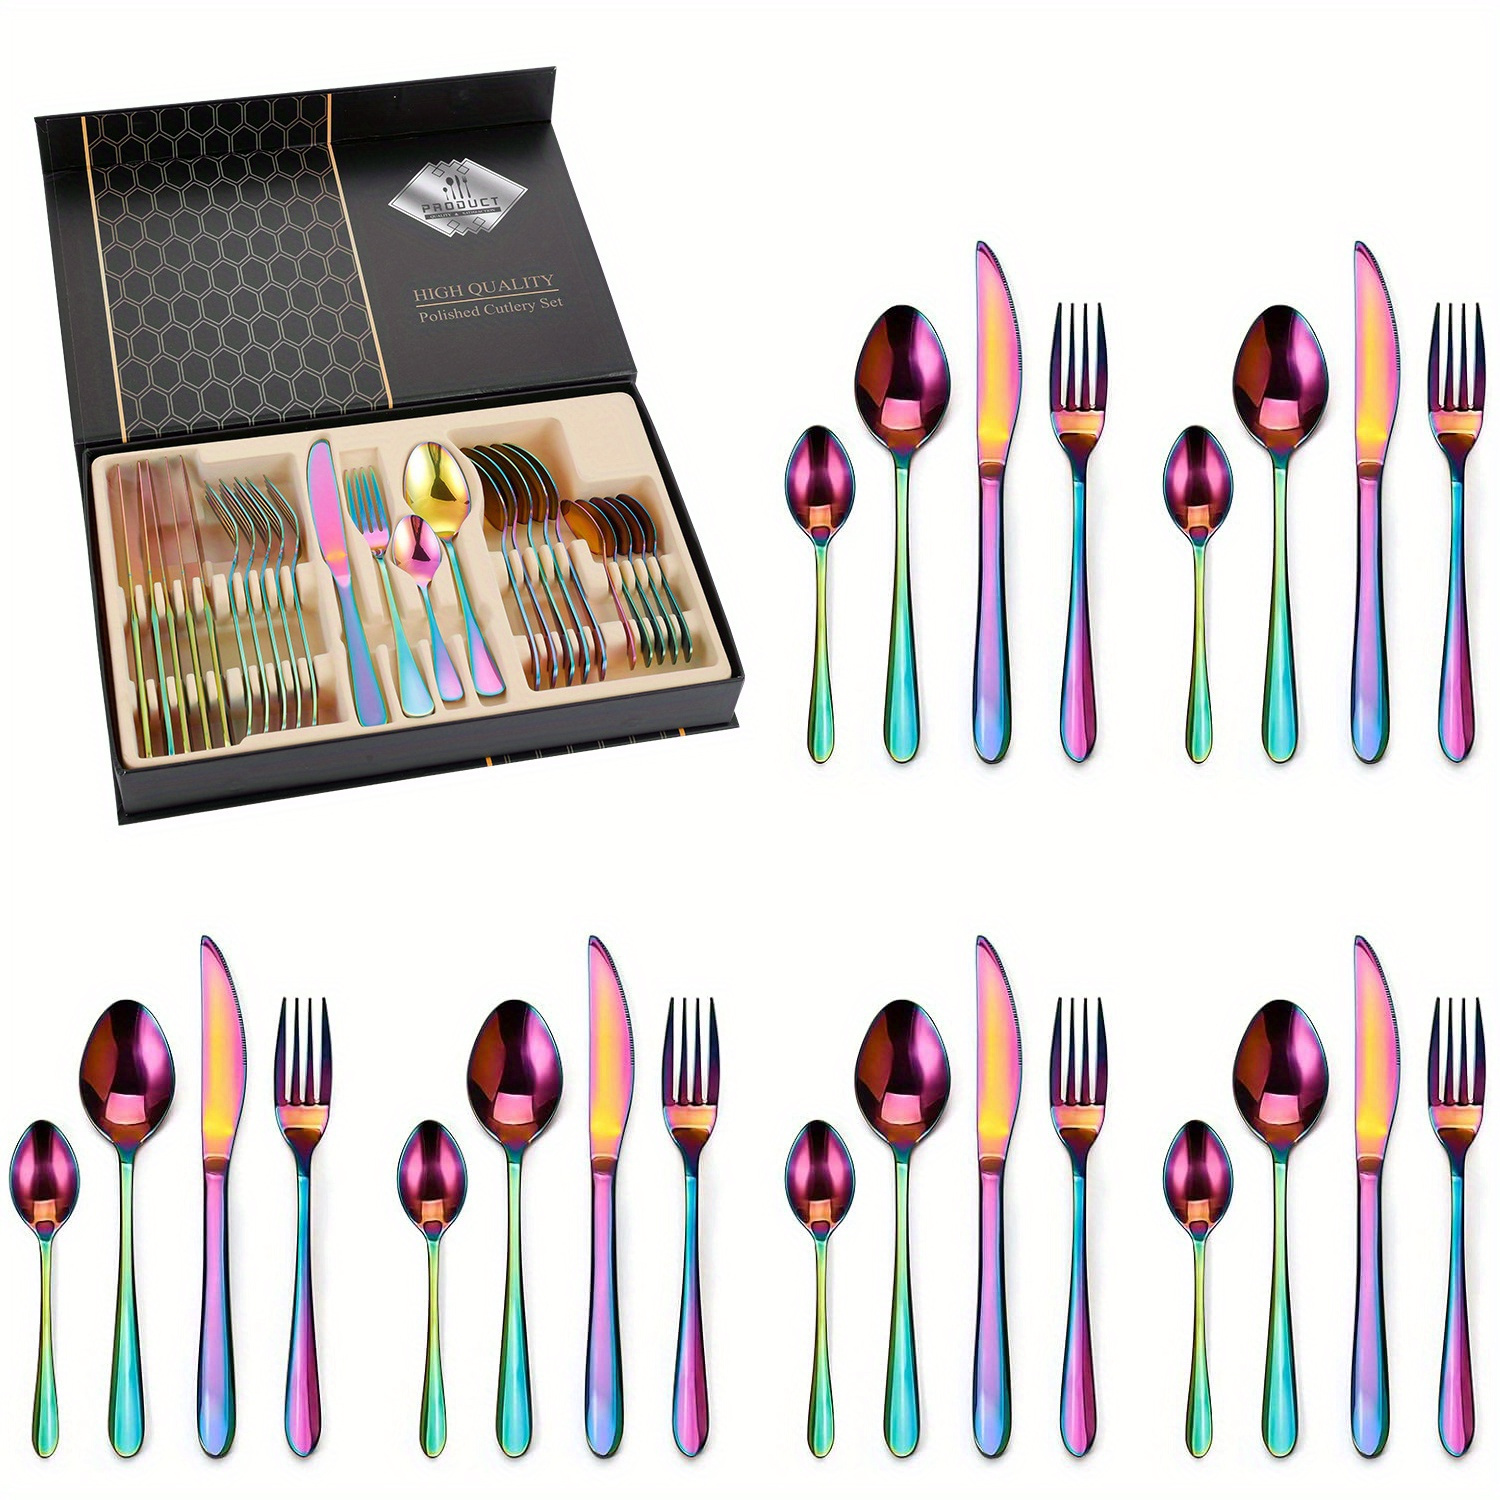 

Rainbow Silverware Set, 24 Piece Stainless Steel Flatware Set, Service For 6, Tableware Cutlery Include Knife/fork/spoon/teaspoon For Home With Gift Box